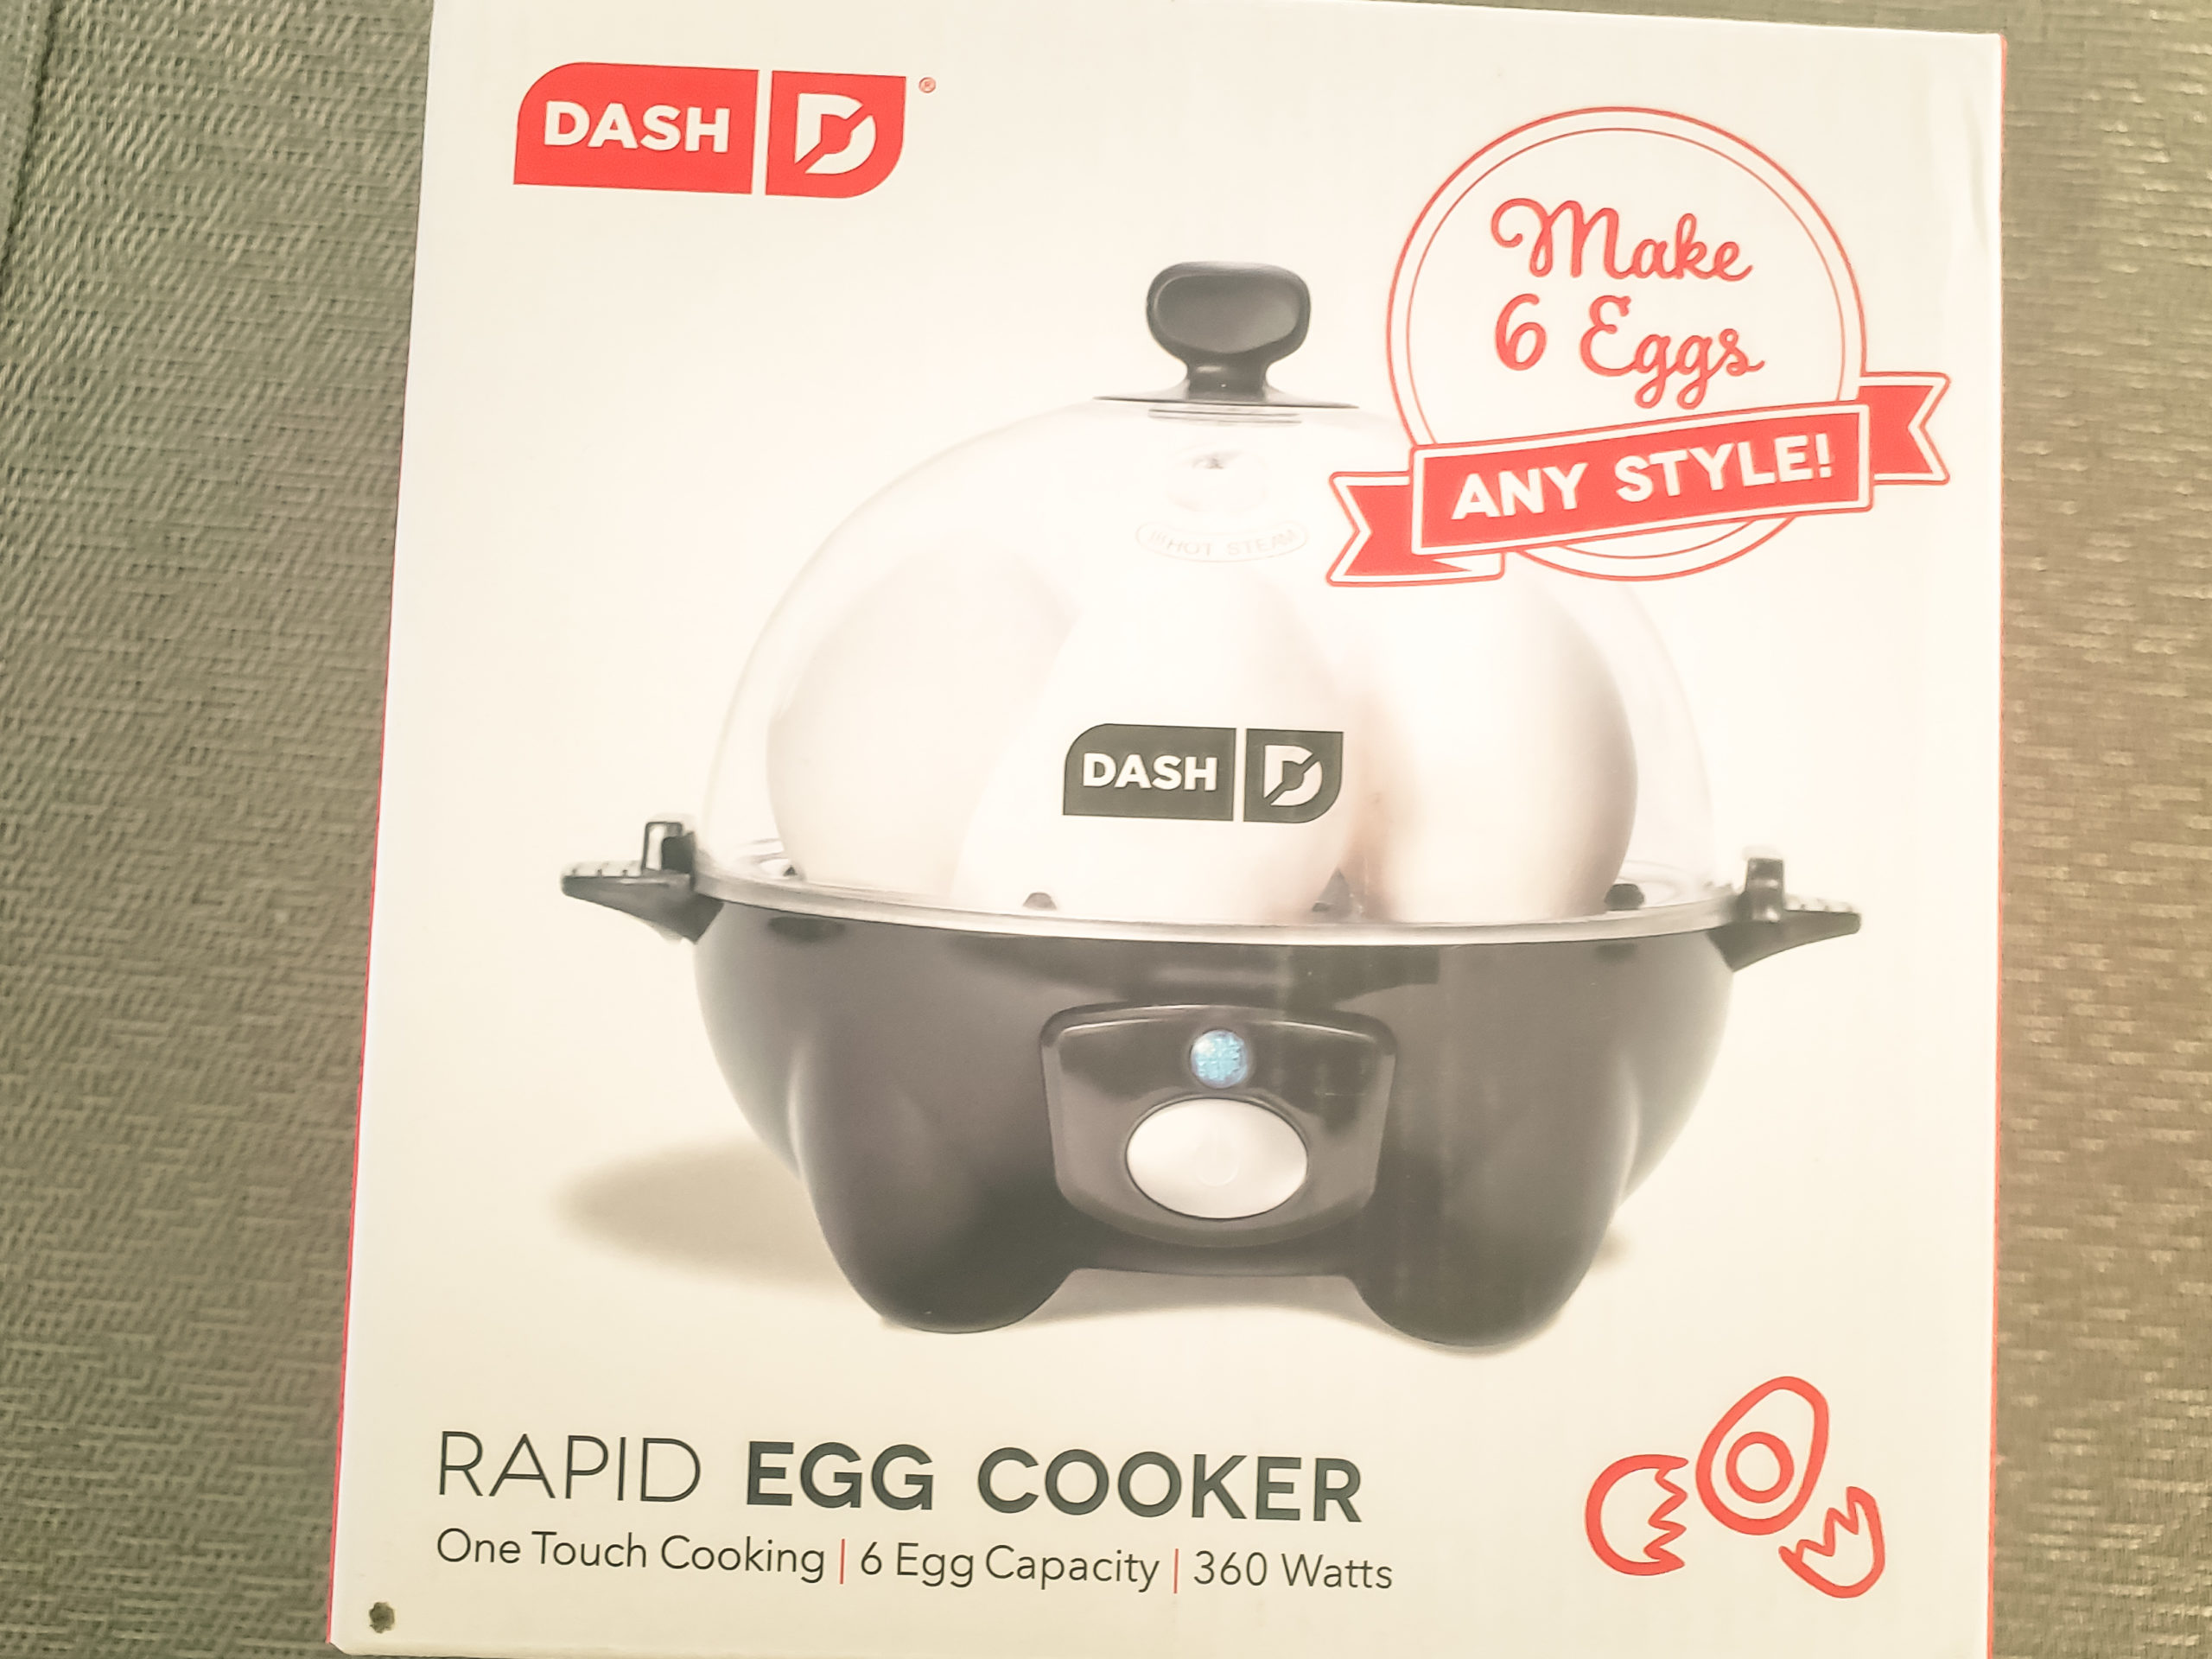 DASH Rapid Egg Cooker Review